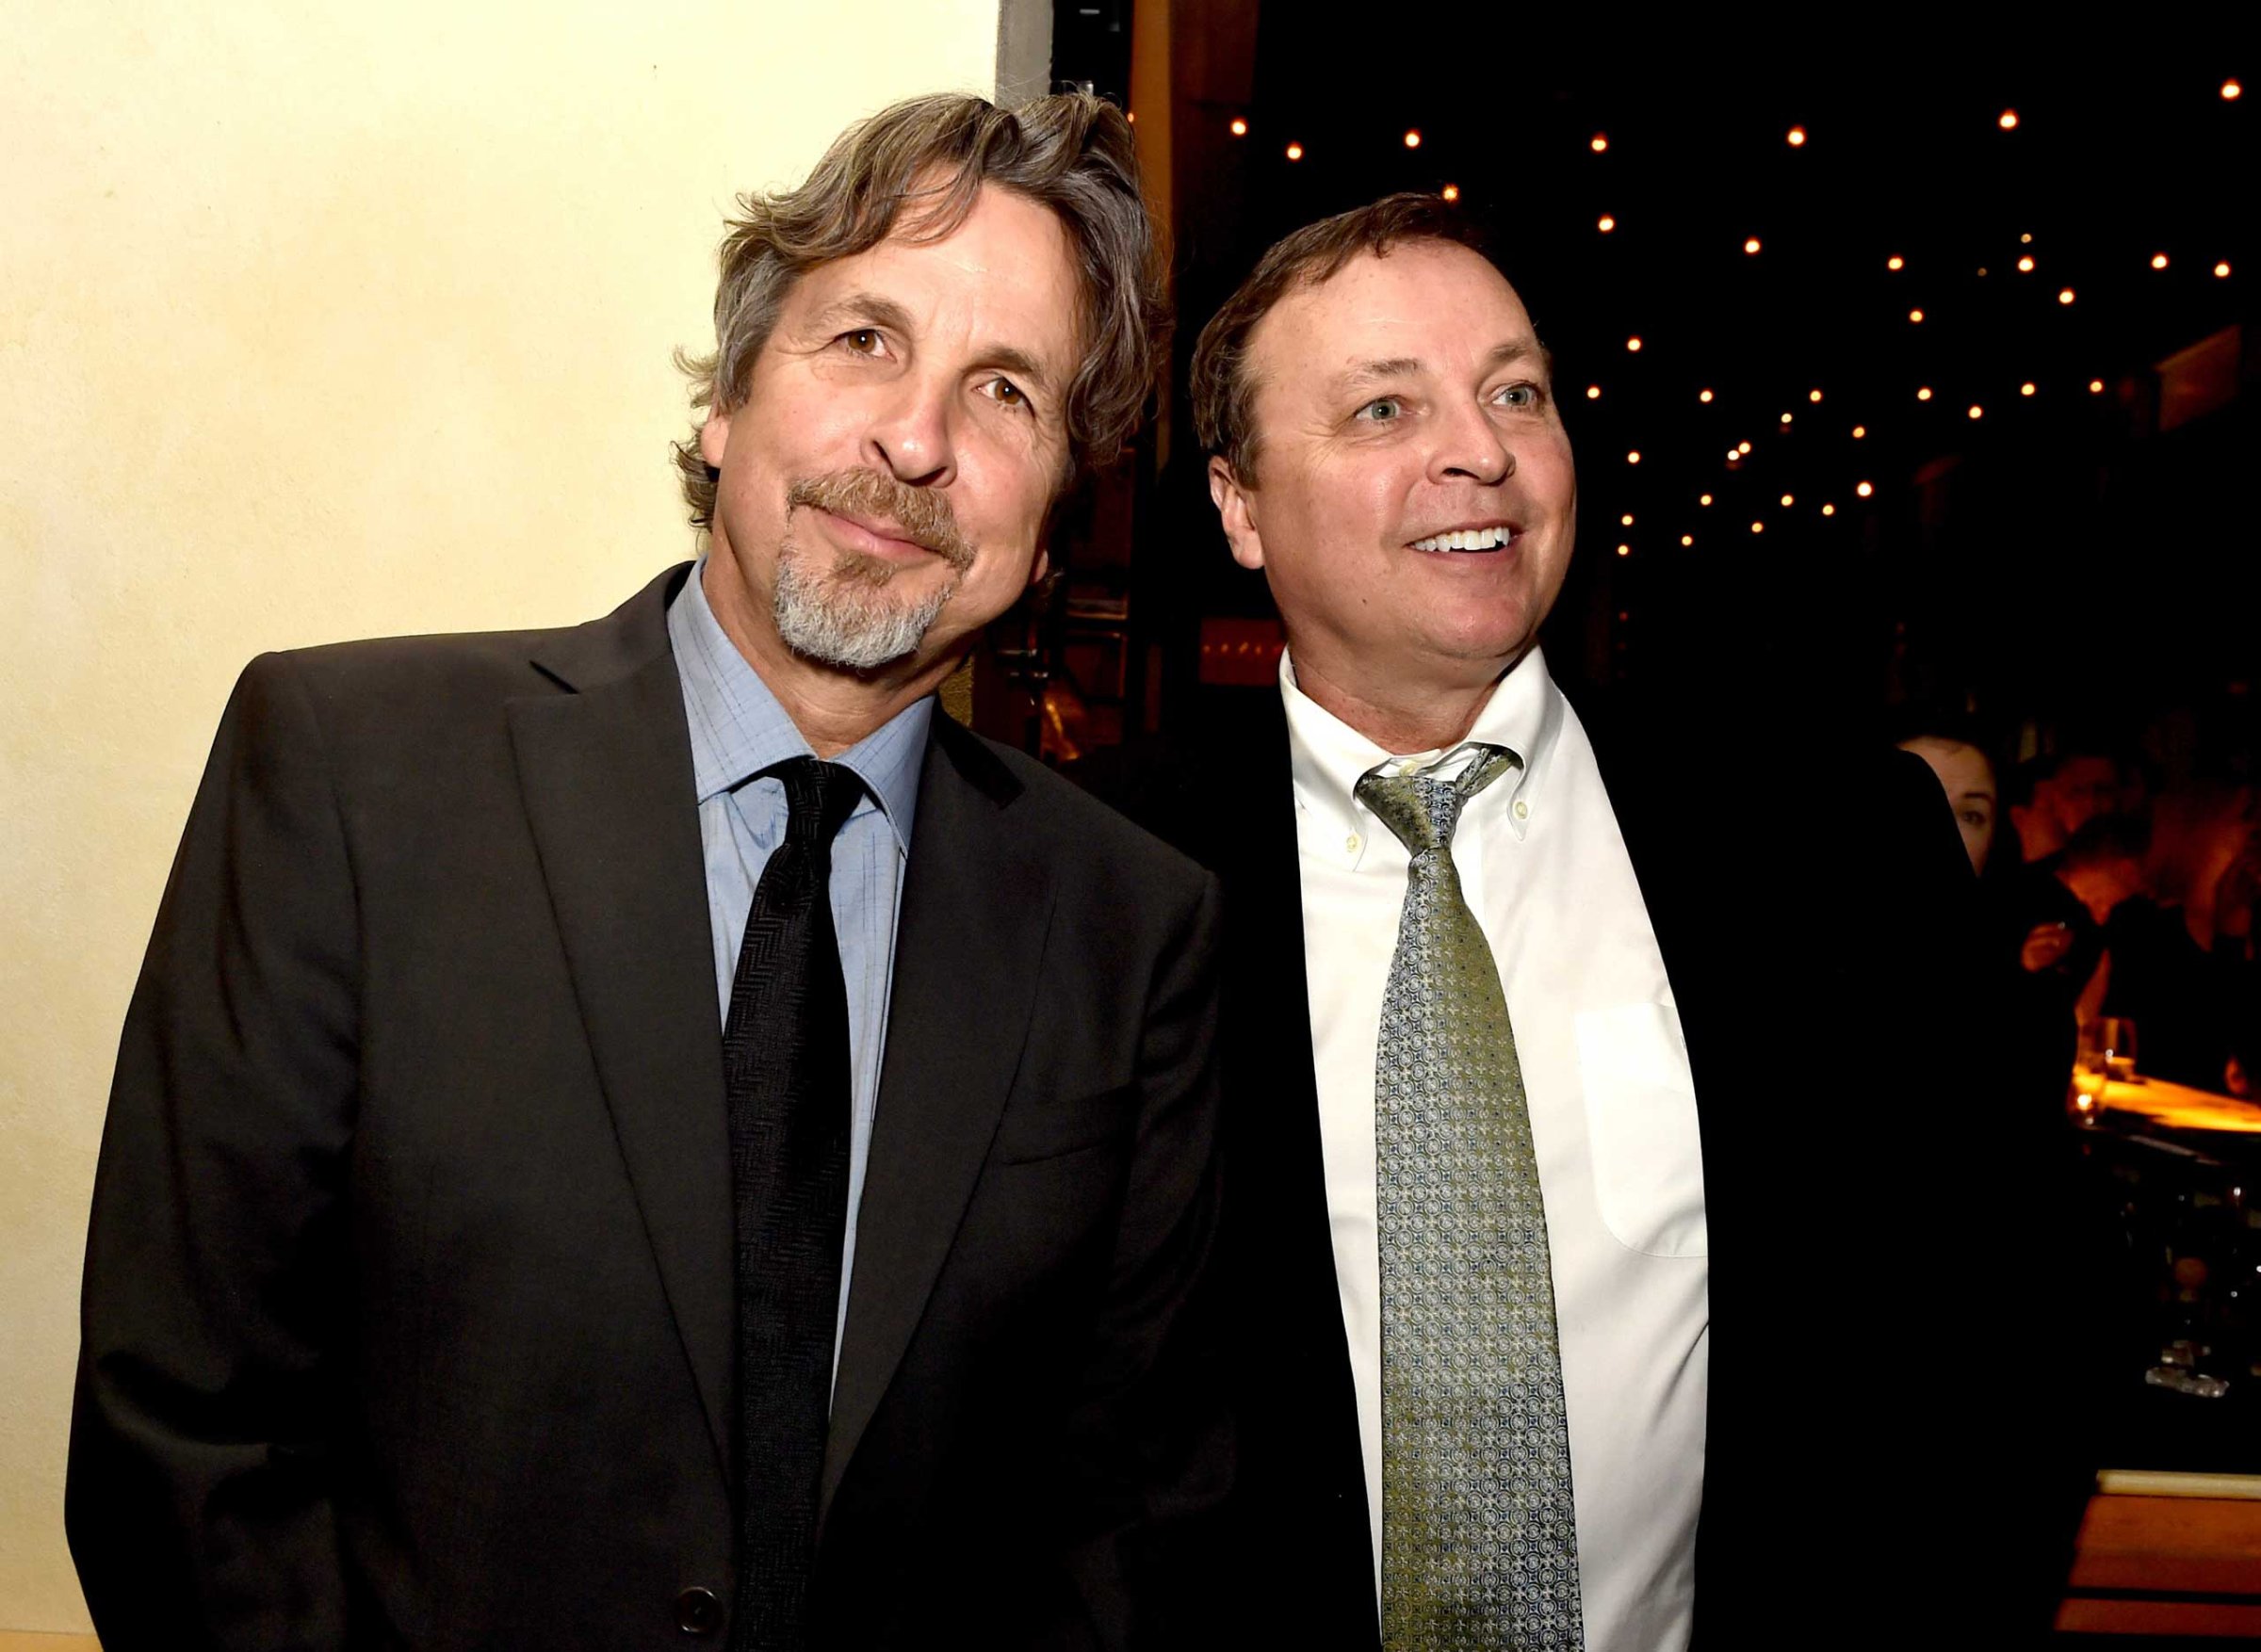 Peter Farrelly and Bobby Farrelly at the after party for the premiere of Universal Pictures and Red Granite Pictures' "Dumb And Dumber To" at the Napa Valley Grille on Nov. 3, 2014 in Los Angeles.